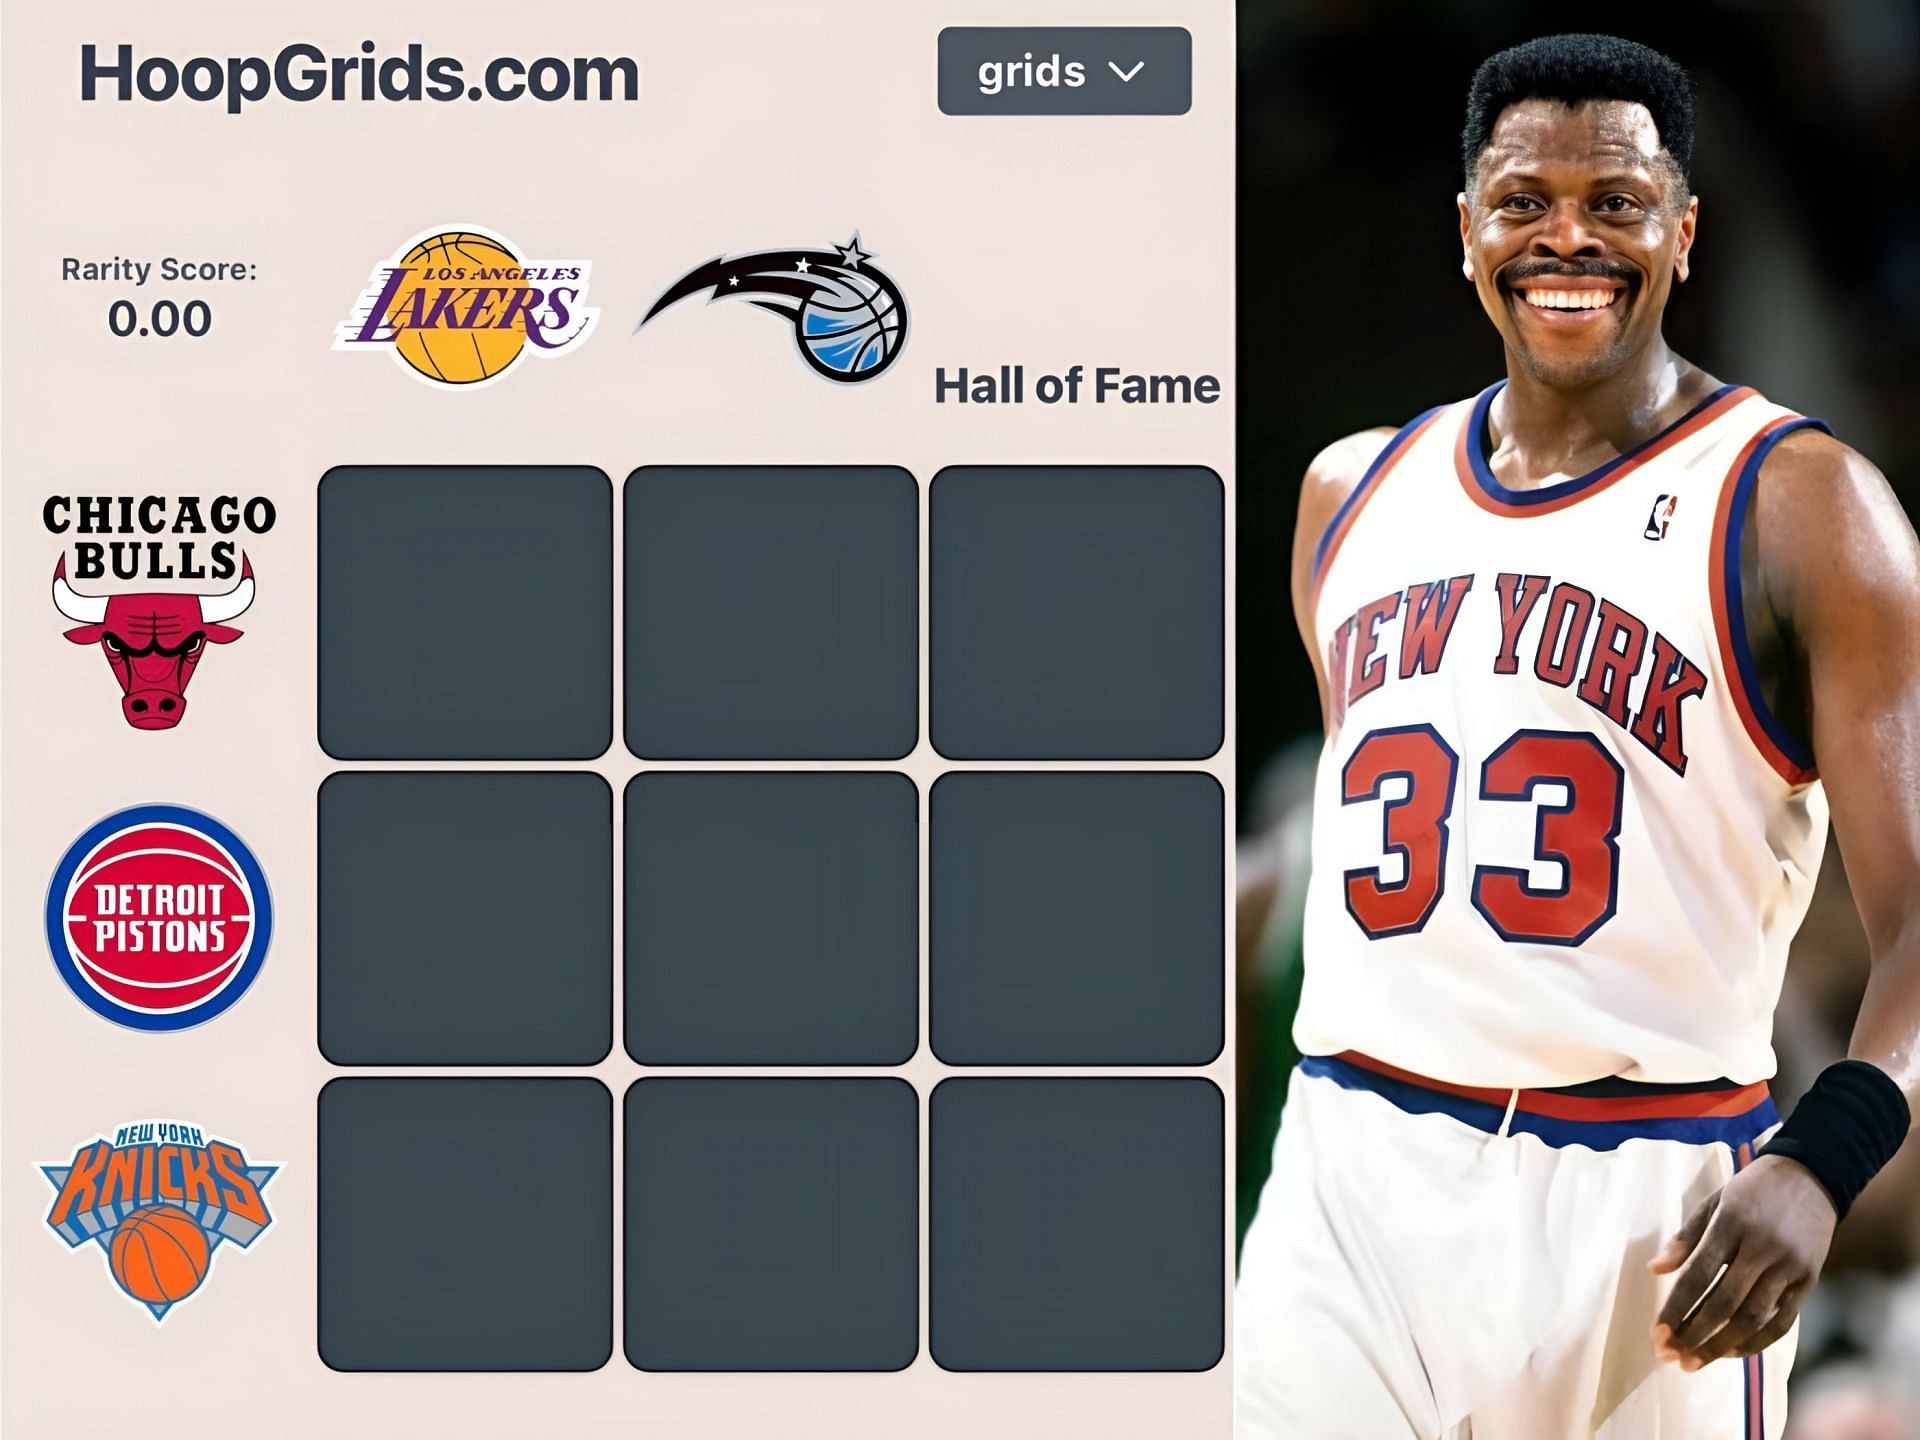 Which Knicks players also played for the Lakers and the Magic? NBA HoopGrids answers for July 26